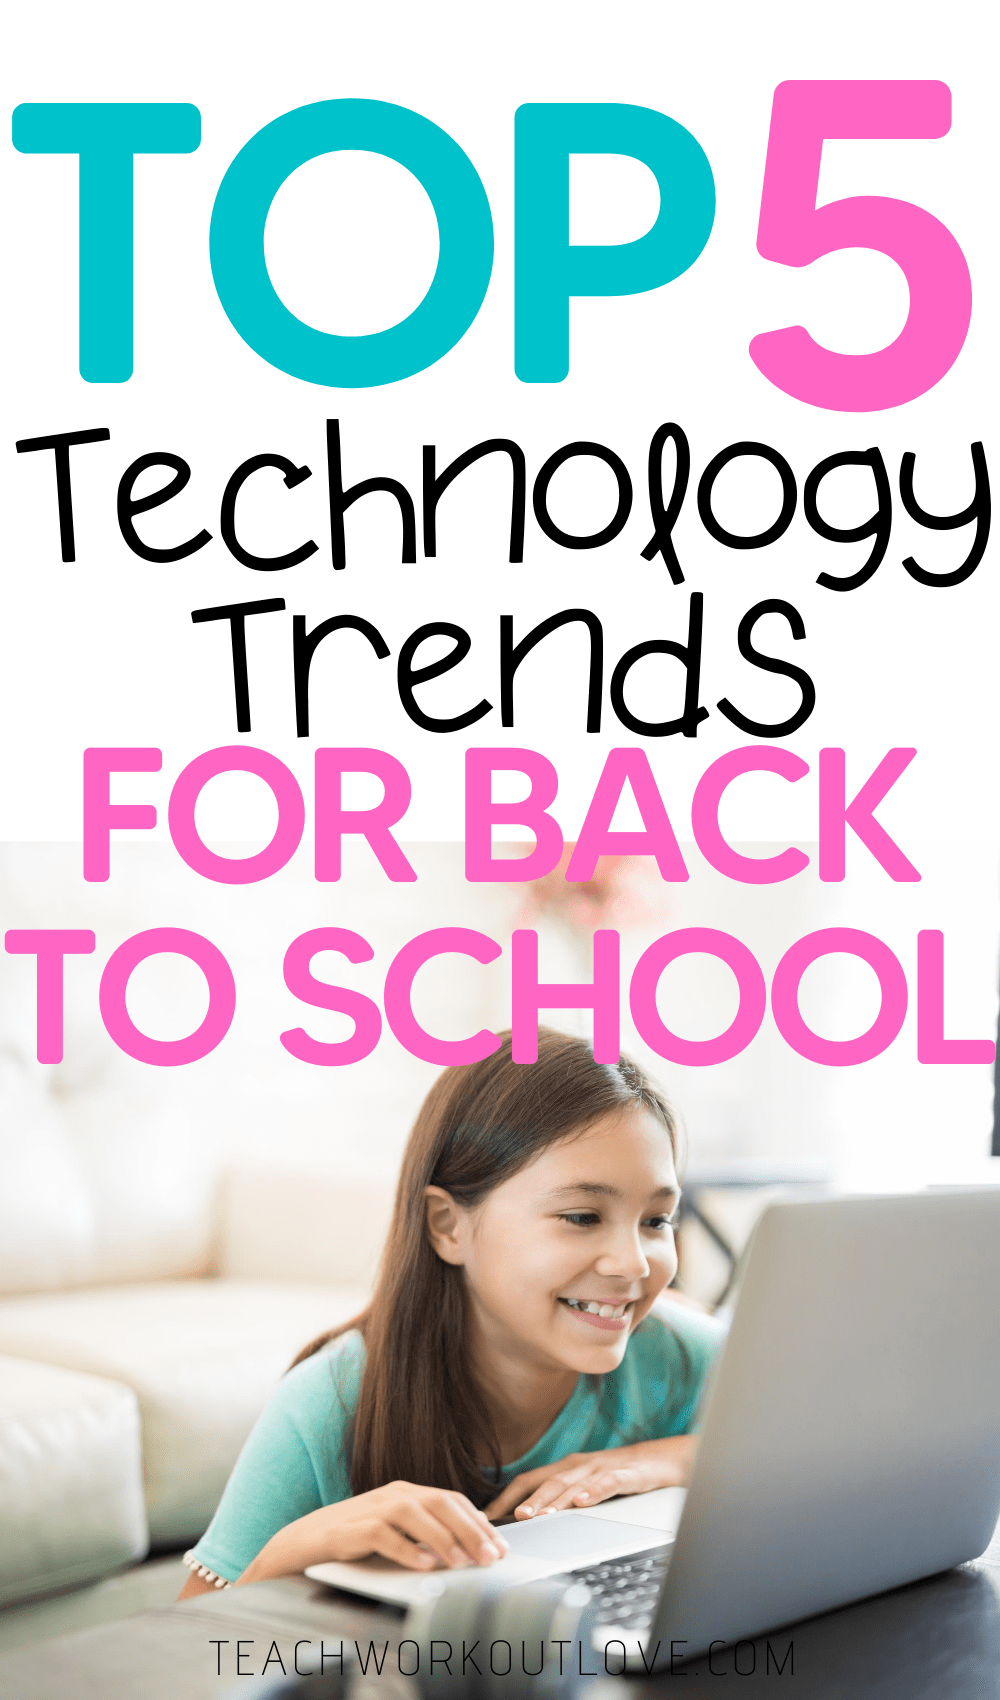 Curious which top tech trends to add to your back-to-school shopping list? Ahead are some of the most essential gadgets for the 2020-2021 school year.